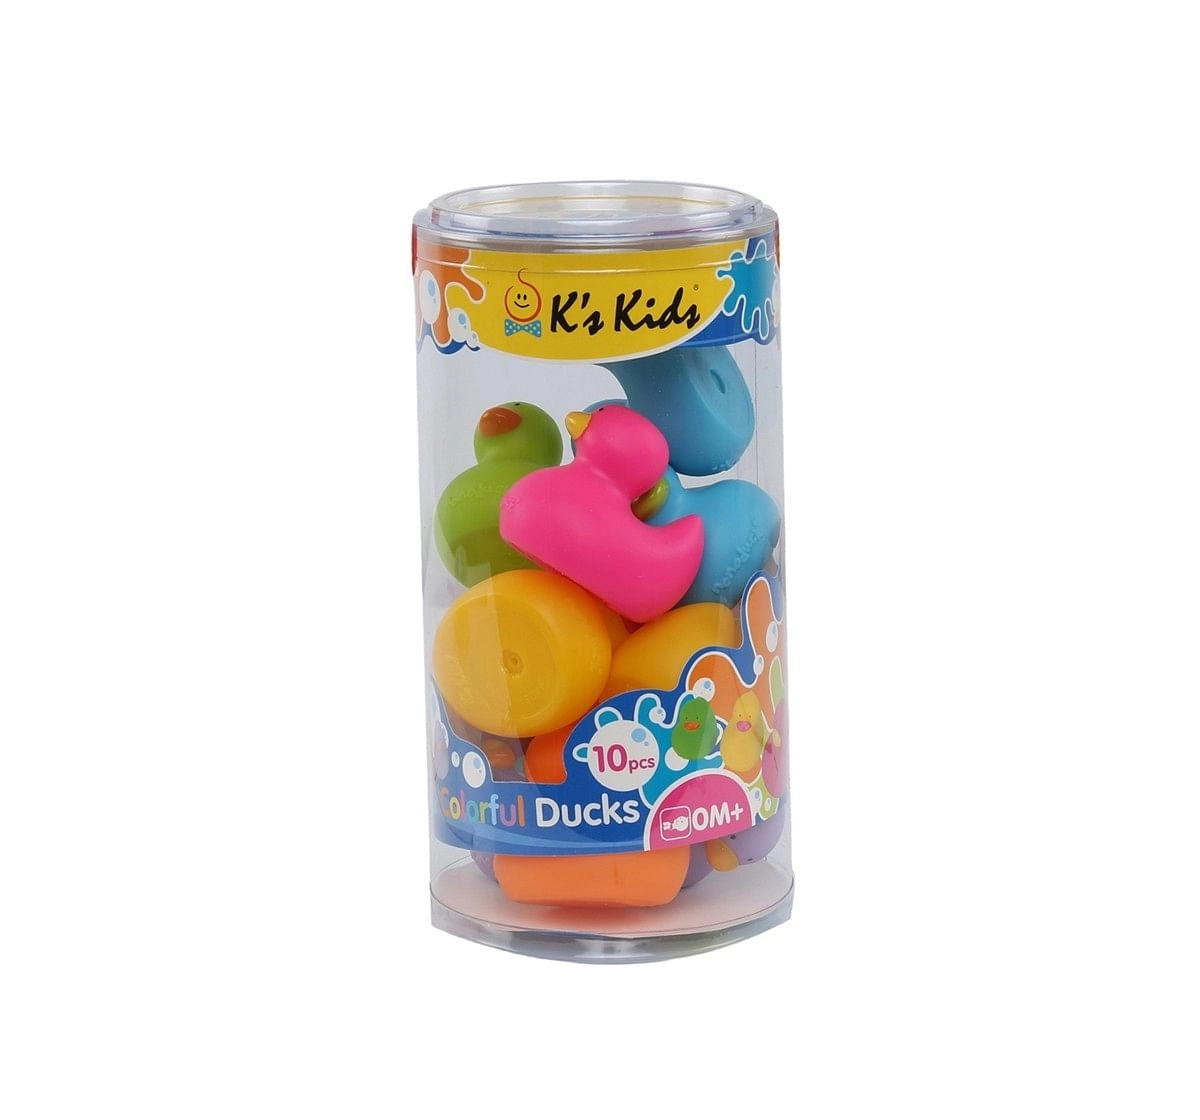 K'S Kids Colorful Bathing Duck Bath Toys & Accessories for Kids age 12M+ 